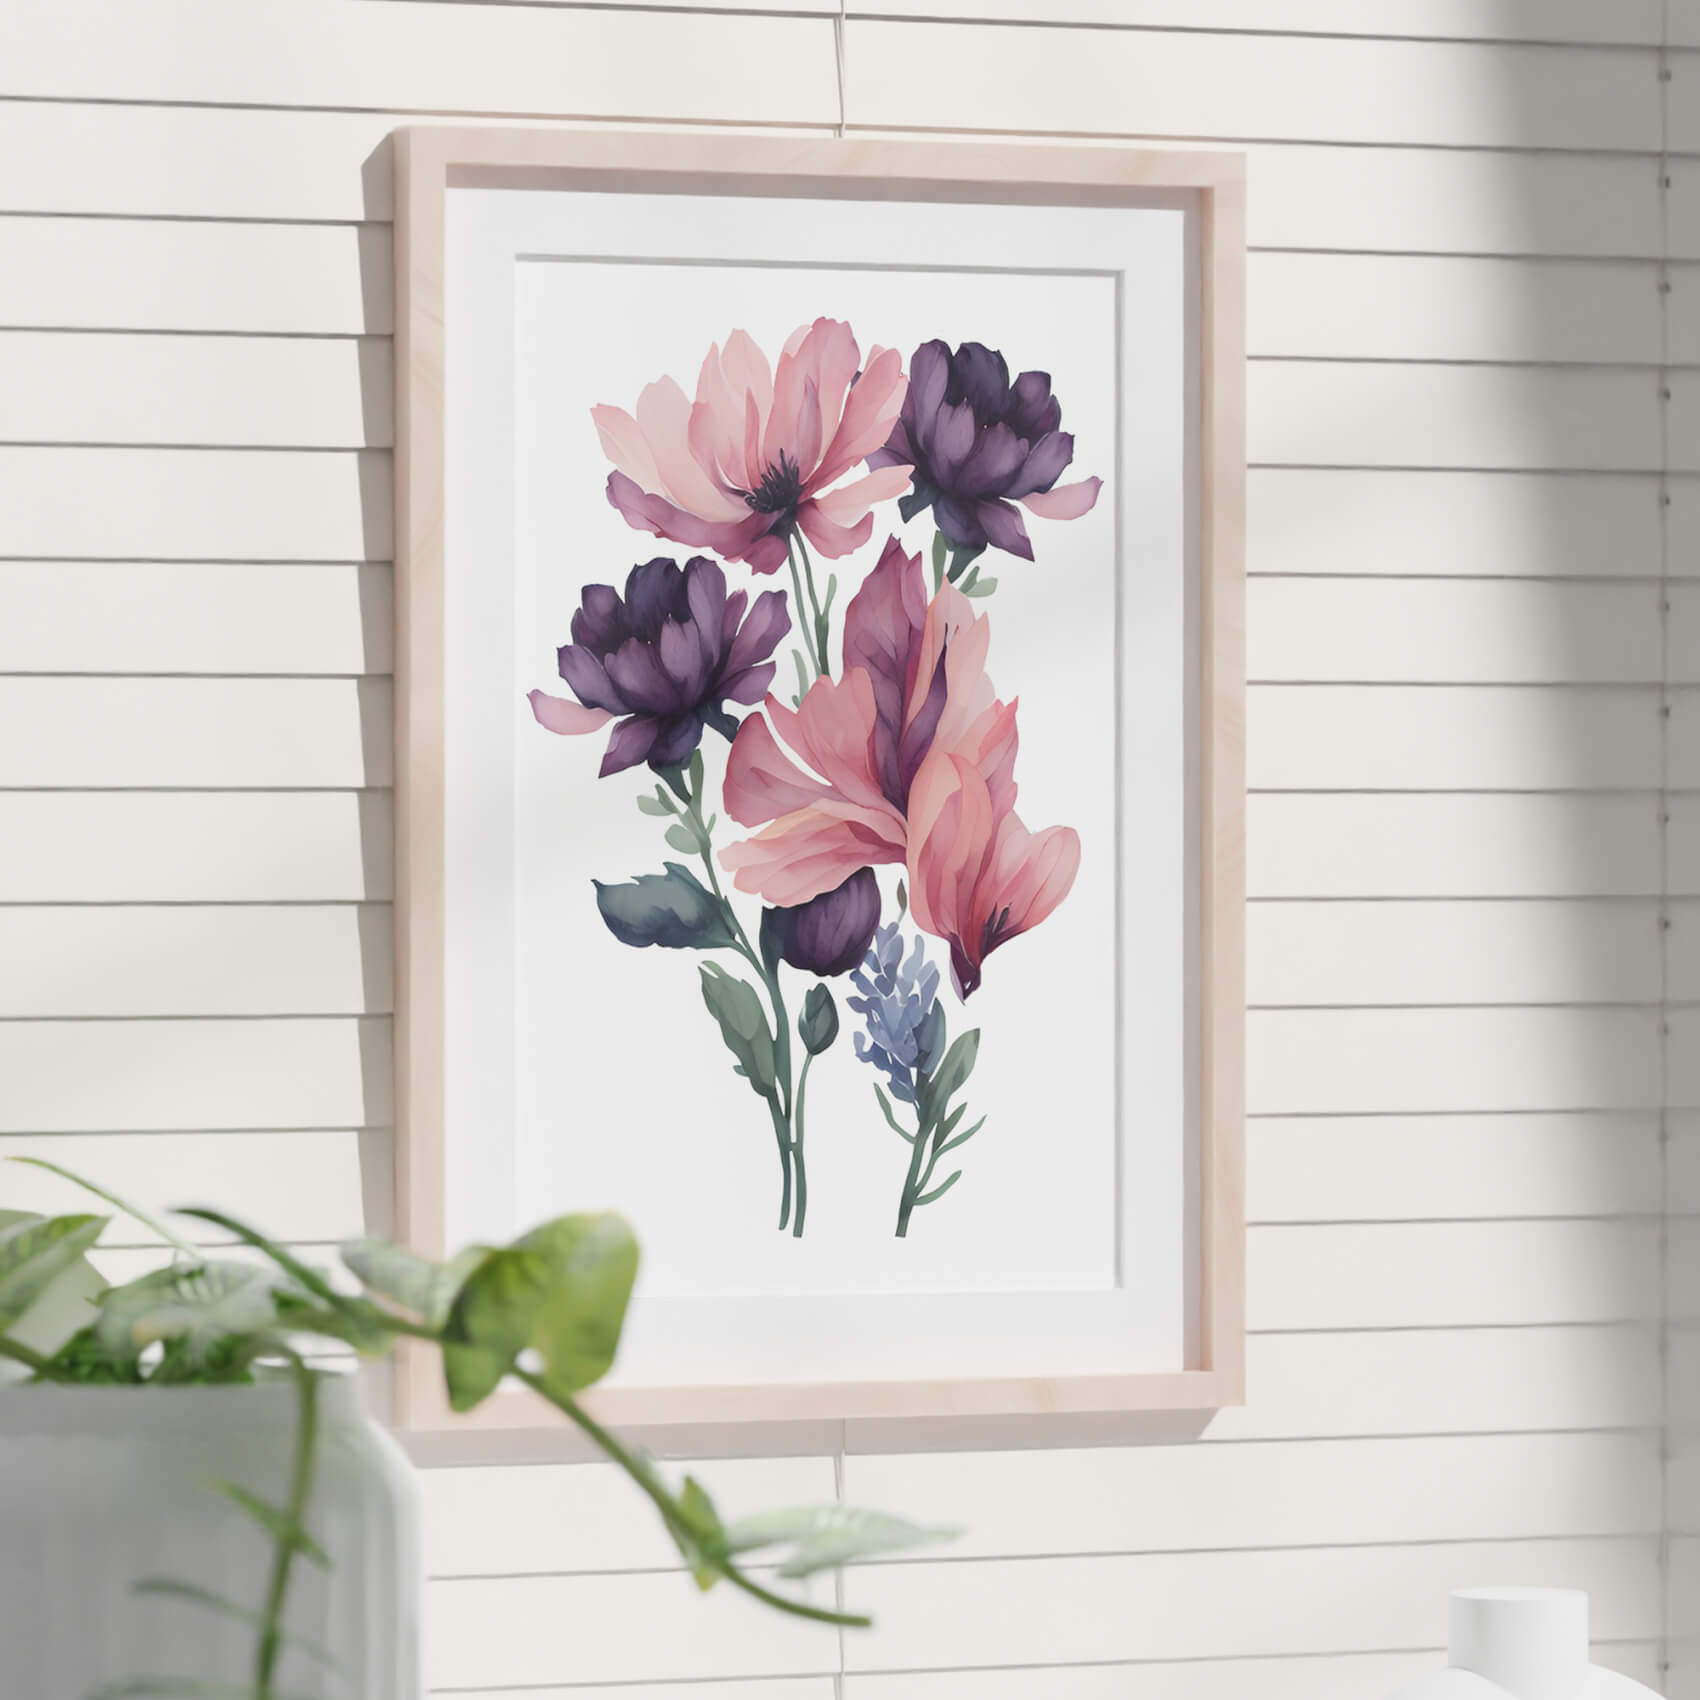 Bloom Into You - Wall Art Print Set Of 2